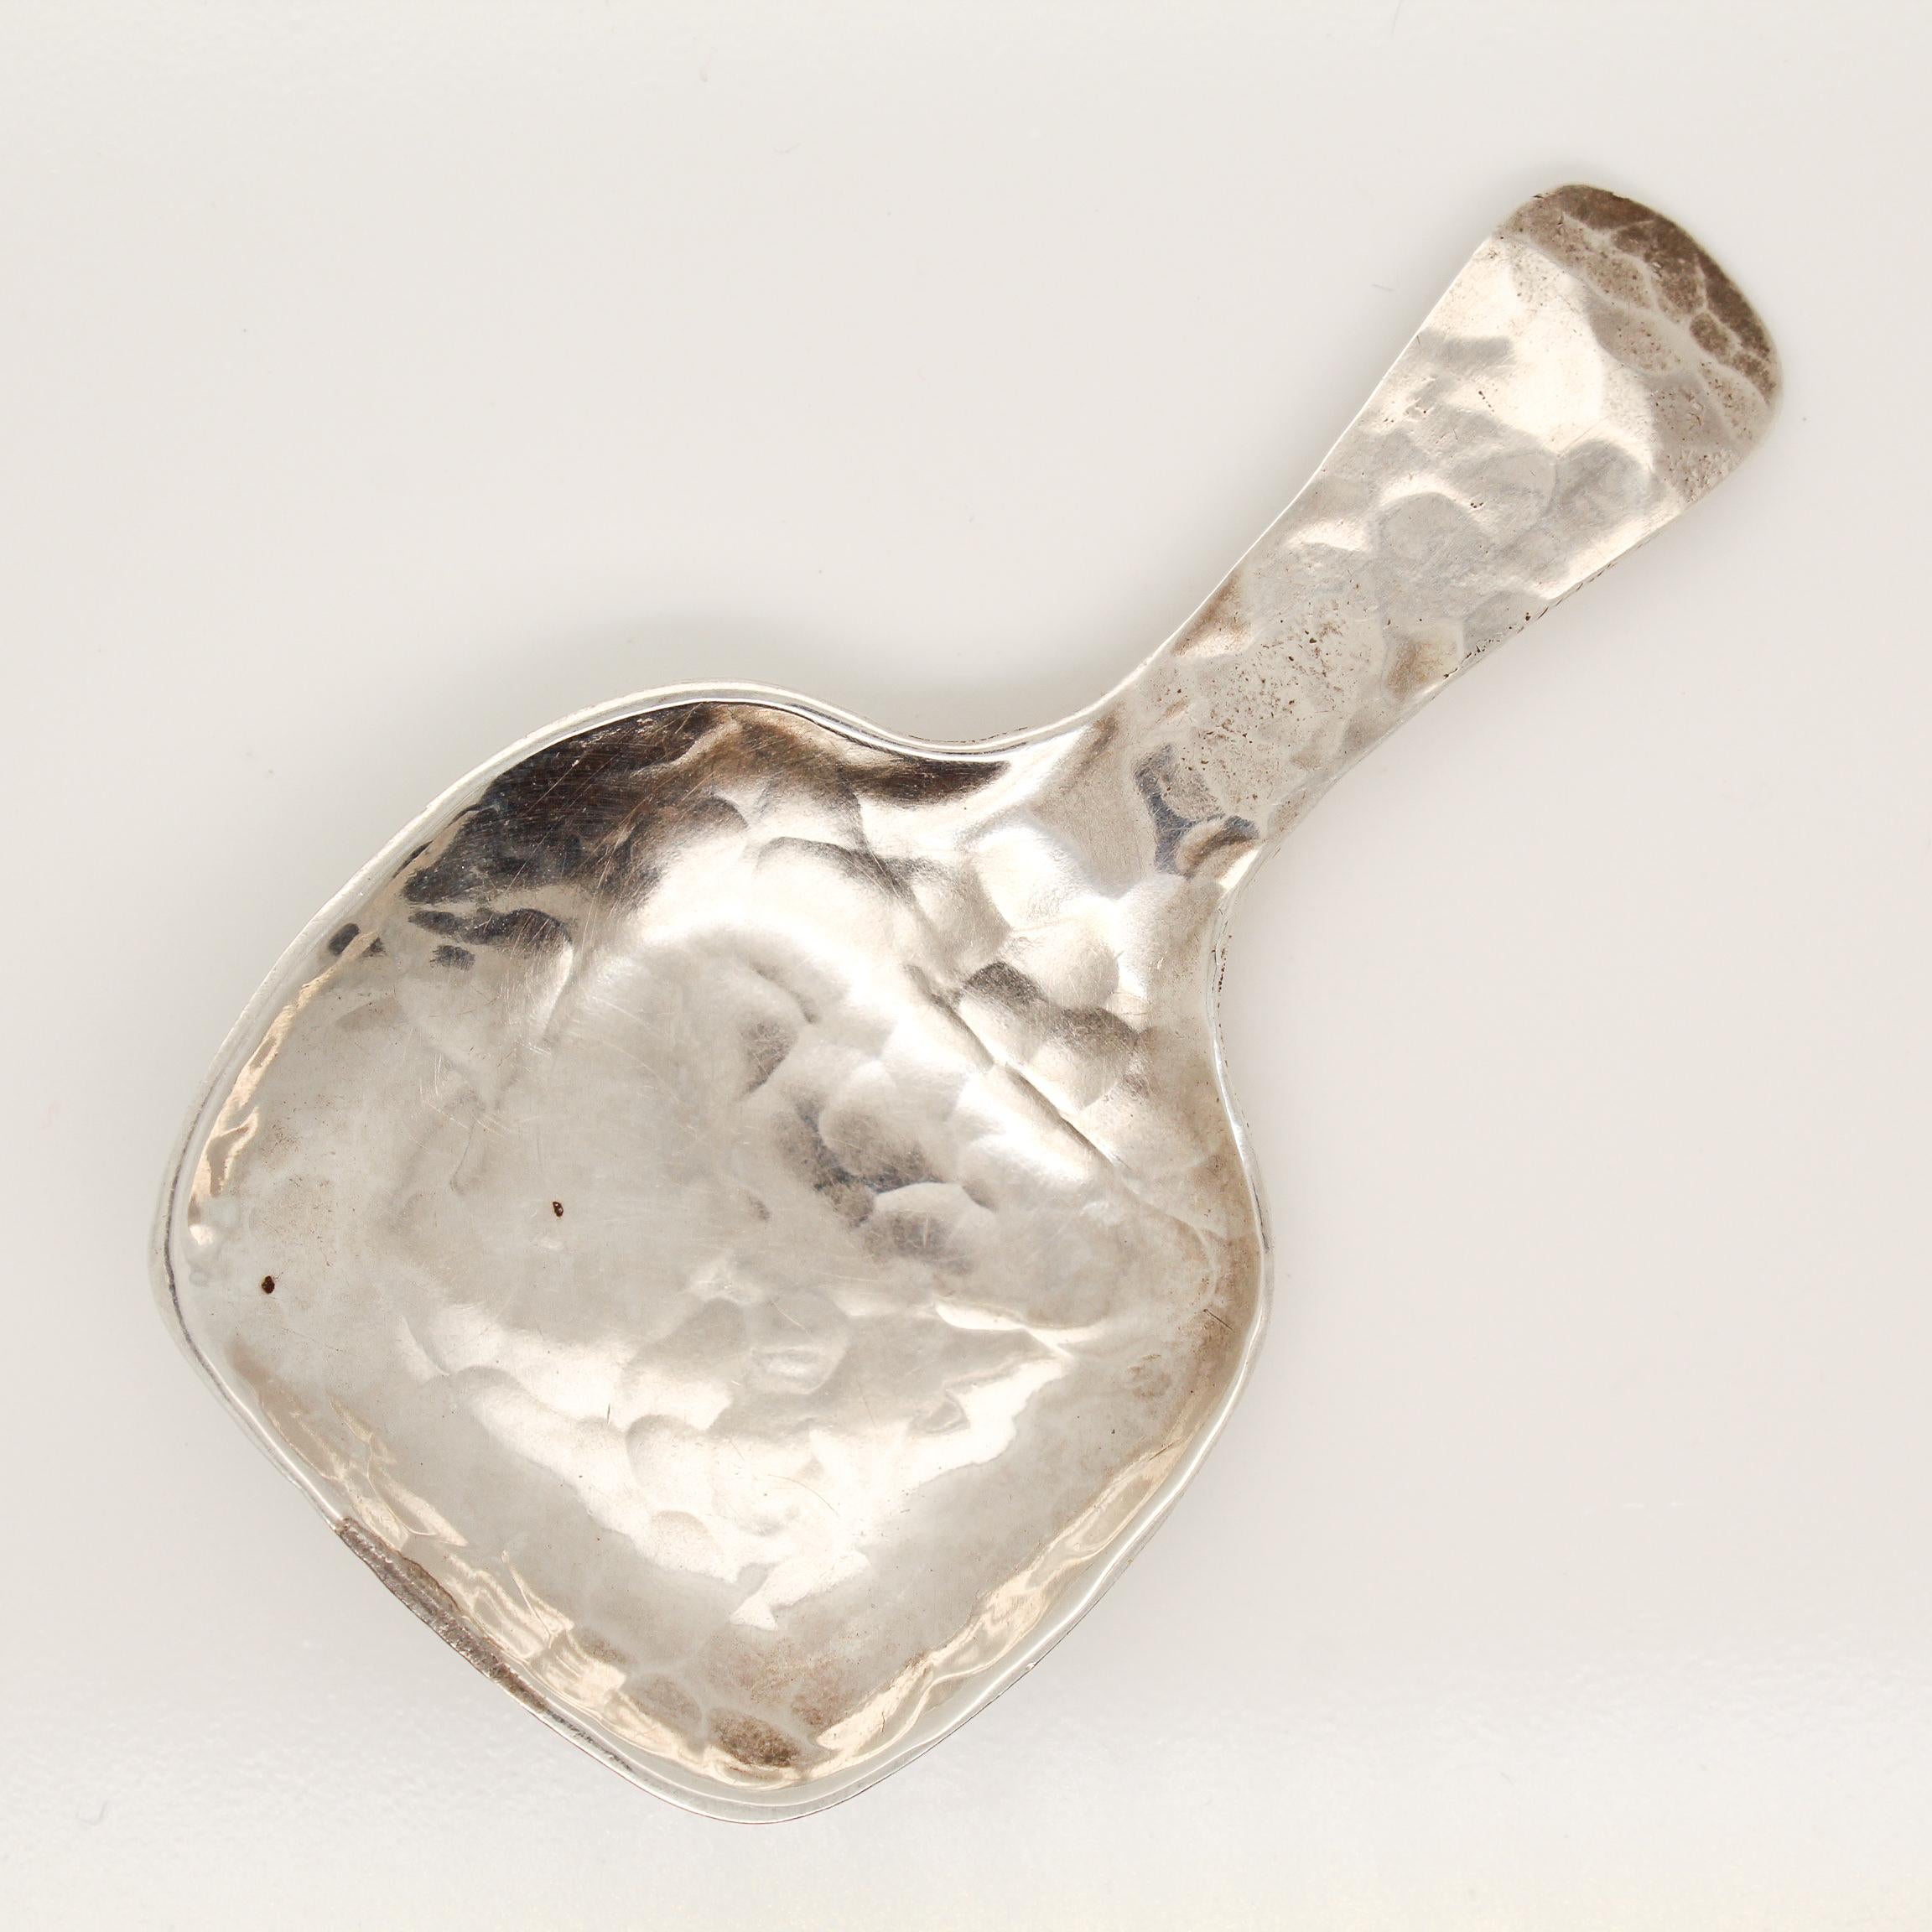 A fine antique sterling silver tea caddy spoon.

Textured throughout with hand hammering.

Simply a great Arts & Crafts design Tea accessory!

Date:
20th Century

Overall Condition:
It is in overall good, as-pictured, used estate